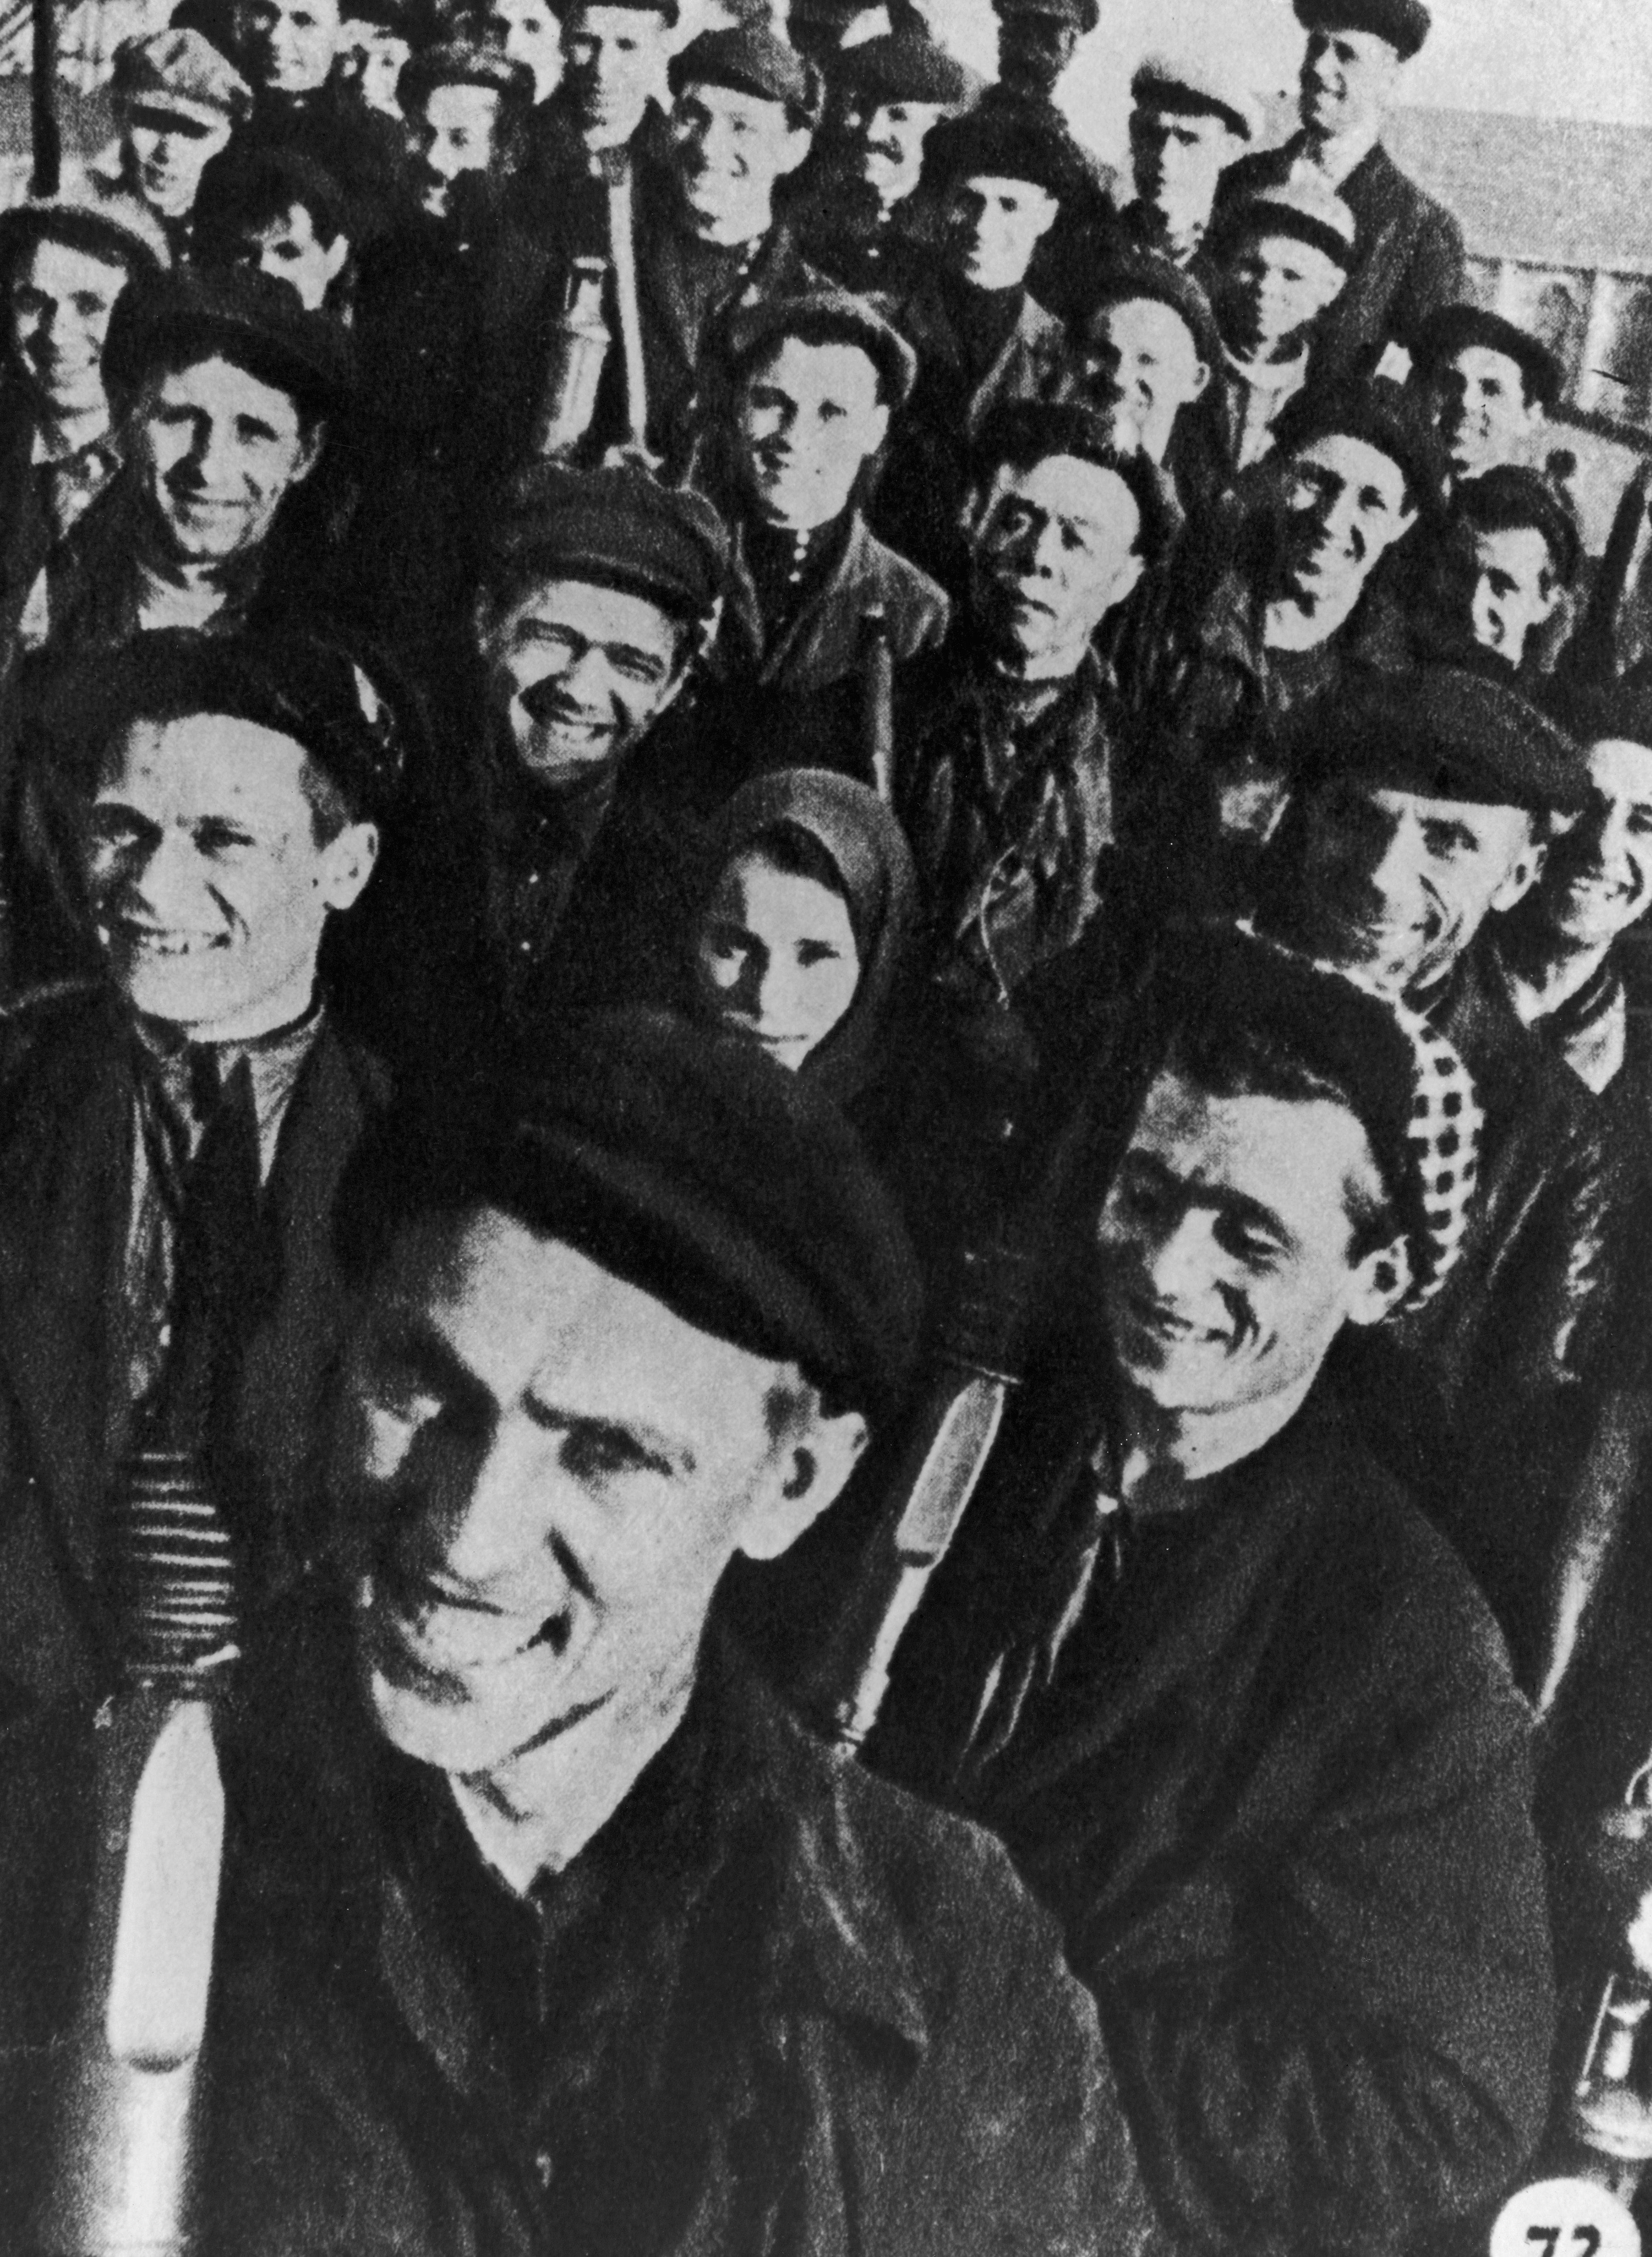 Stakhanov was held up as an example to other workers across the USSR